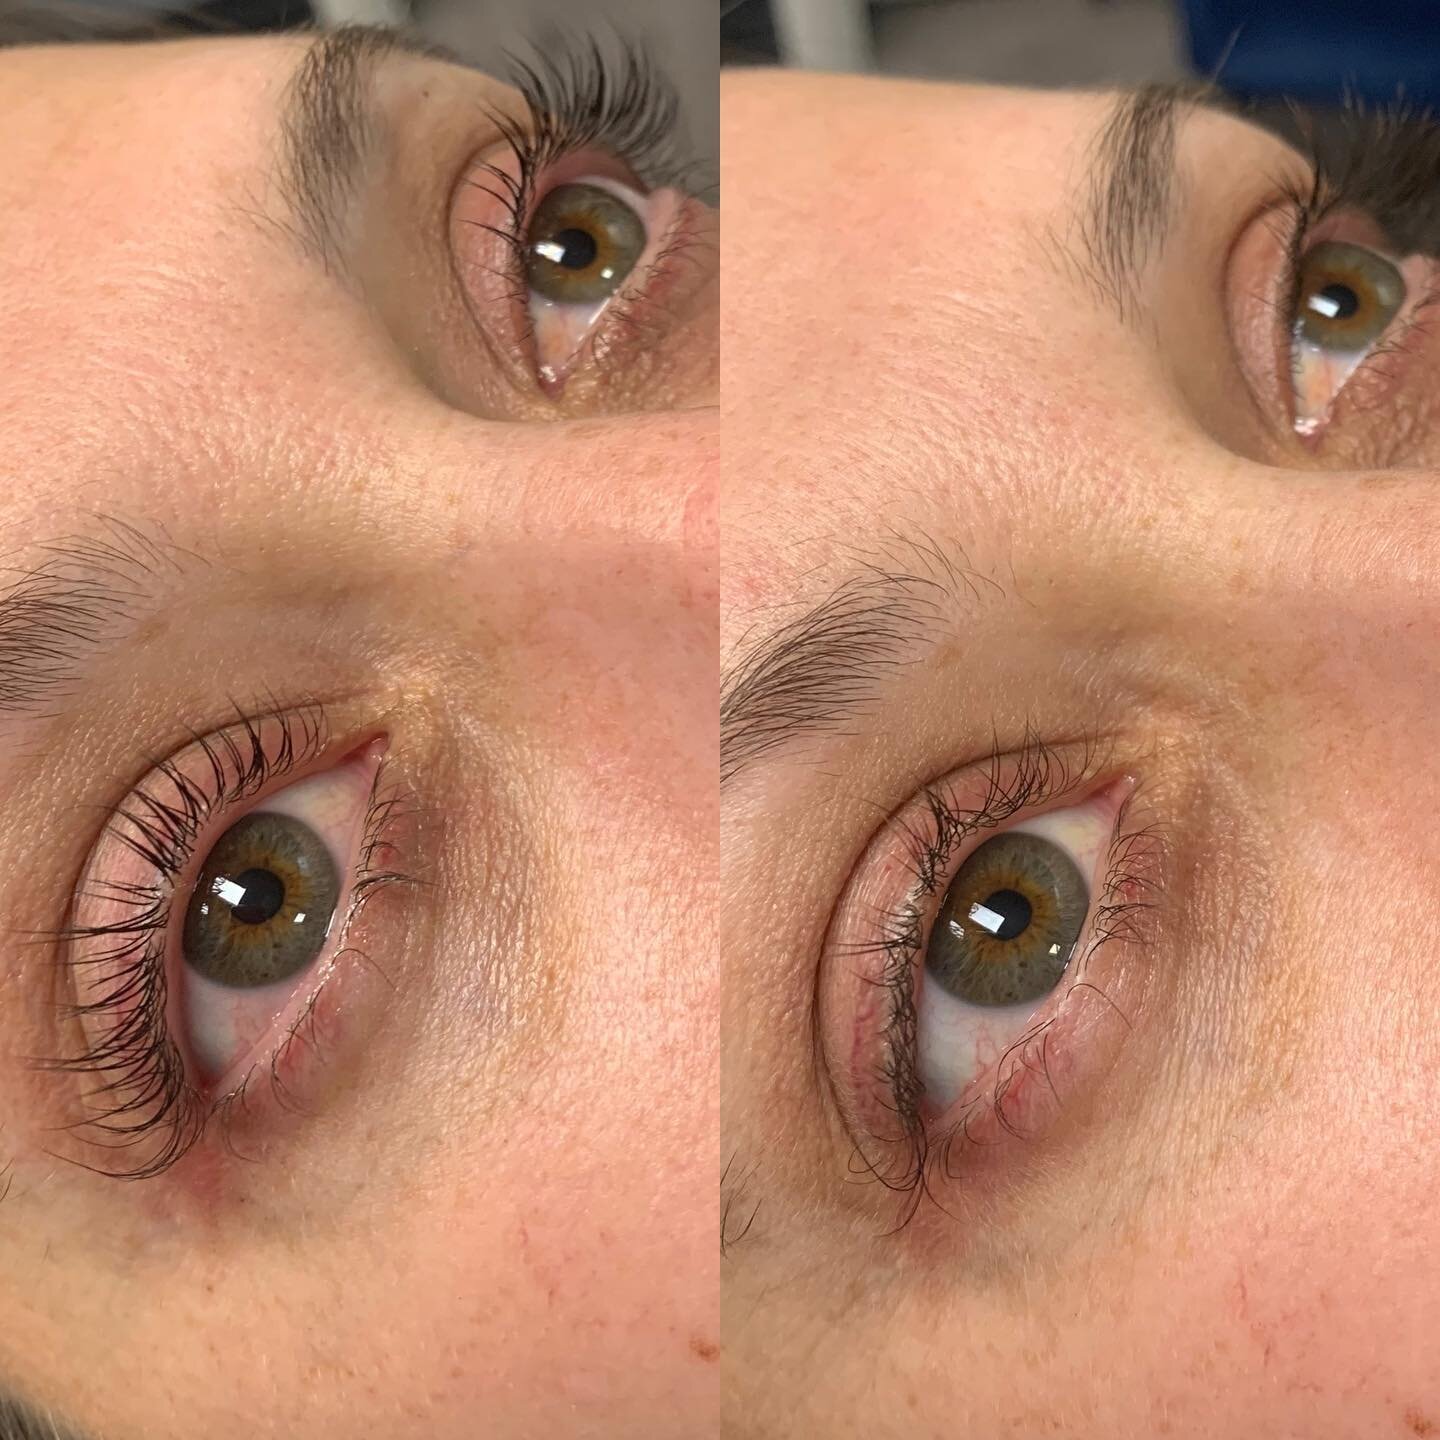 👆🏼👆🏼THIS is why Lash Lift + Tint is one of my absolute favorite services!

#beforeandafter #lashlift #pittsburghspa #pittsburghsalon #picoftheday #TheFaceLabPgh